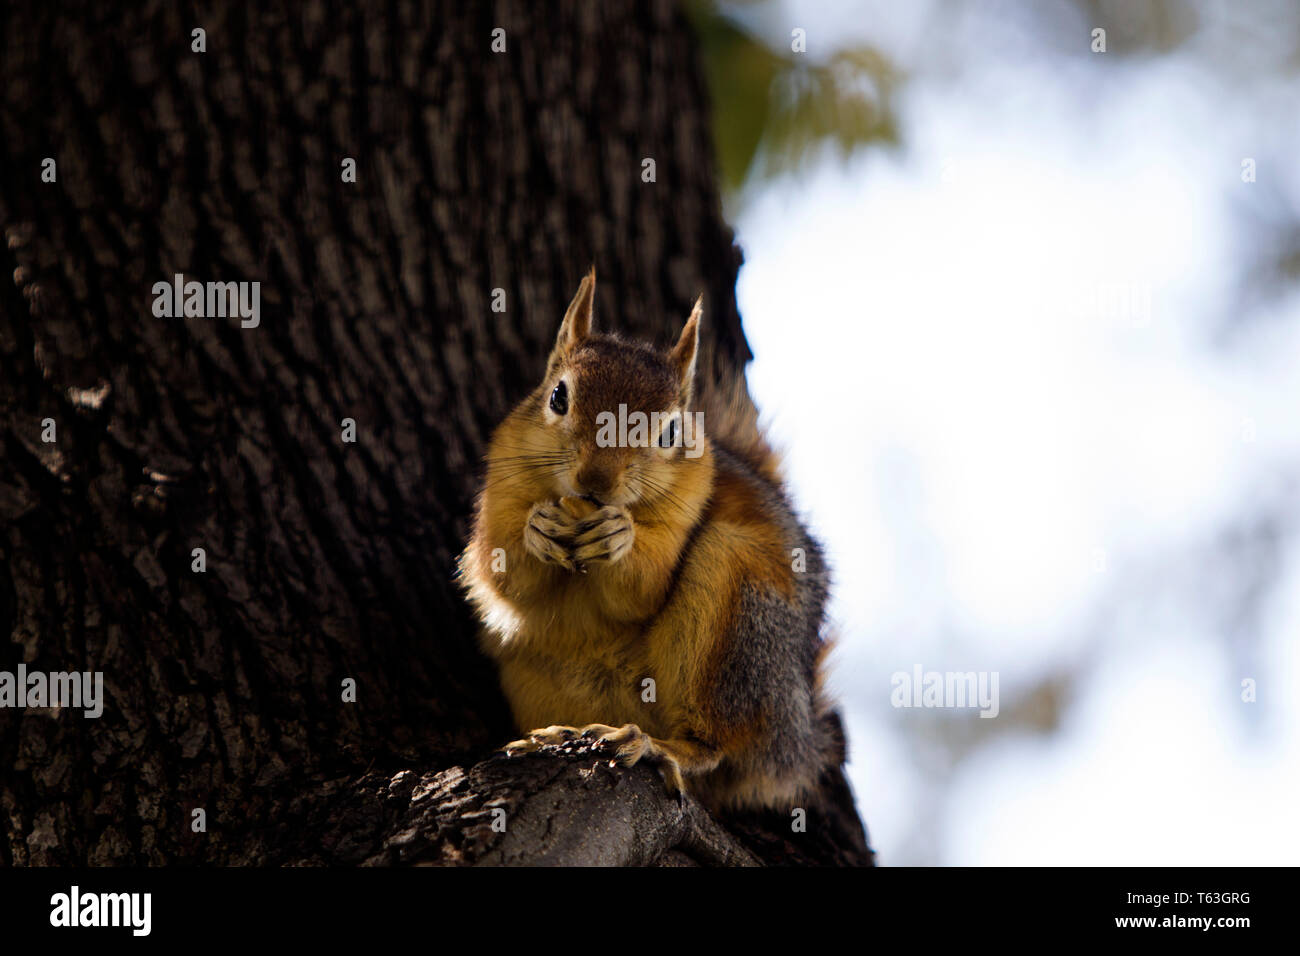 Close up portrait of a Sciurus Anomalus, Caucasian squirrel on a tree trunk eating something. Stock Photo